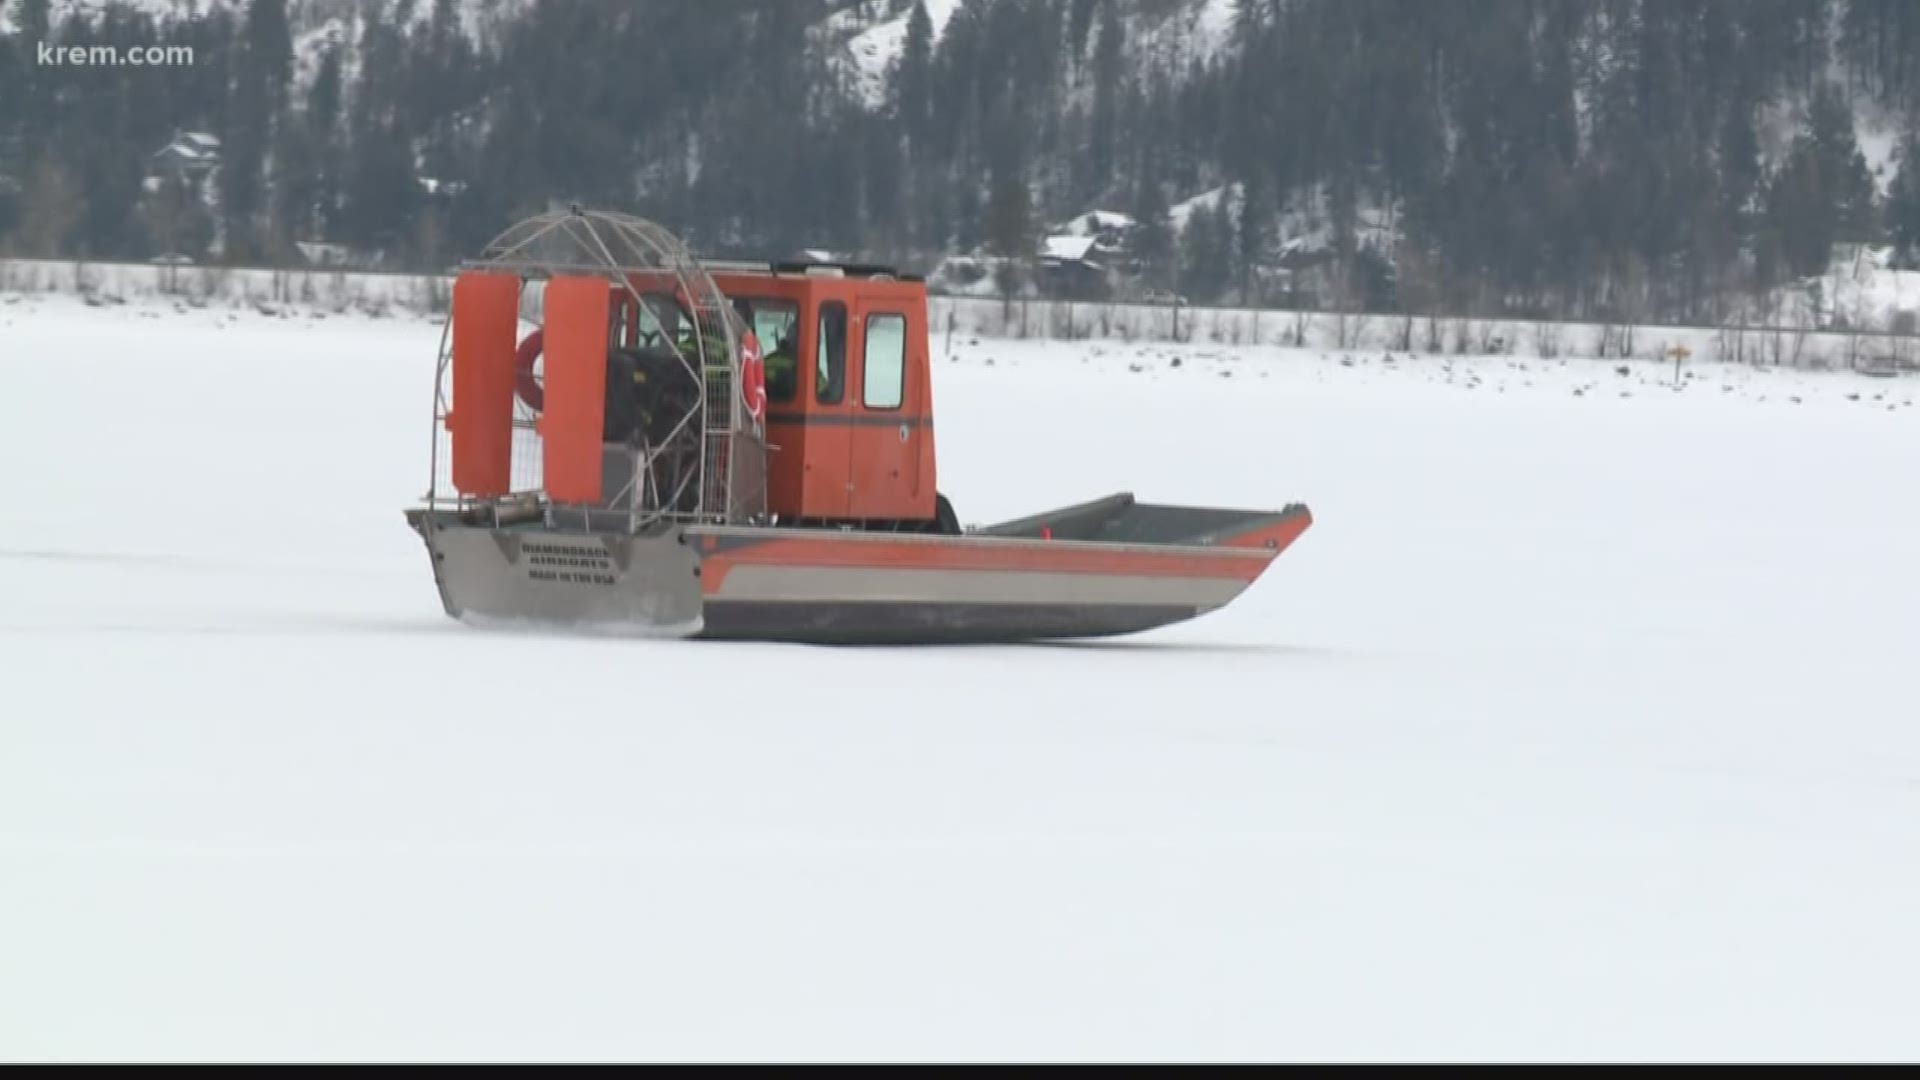 KREM Reporter Taylor Viydo traveled to Lake Pend Oreille as Bonner County first responders and BNSF practiced water rescues in cold temperatures.